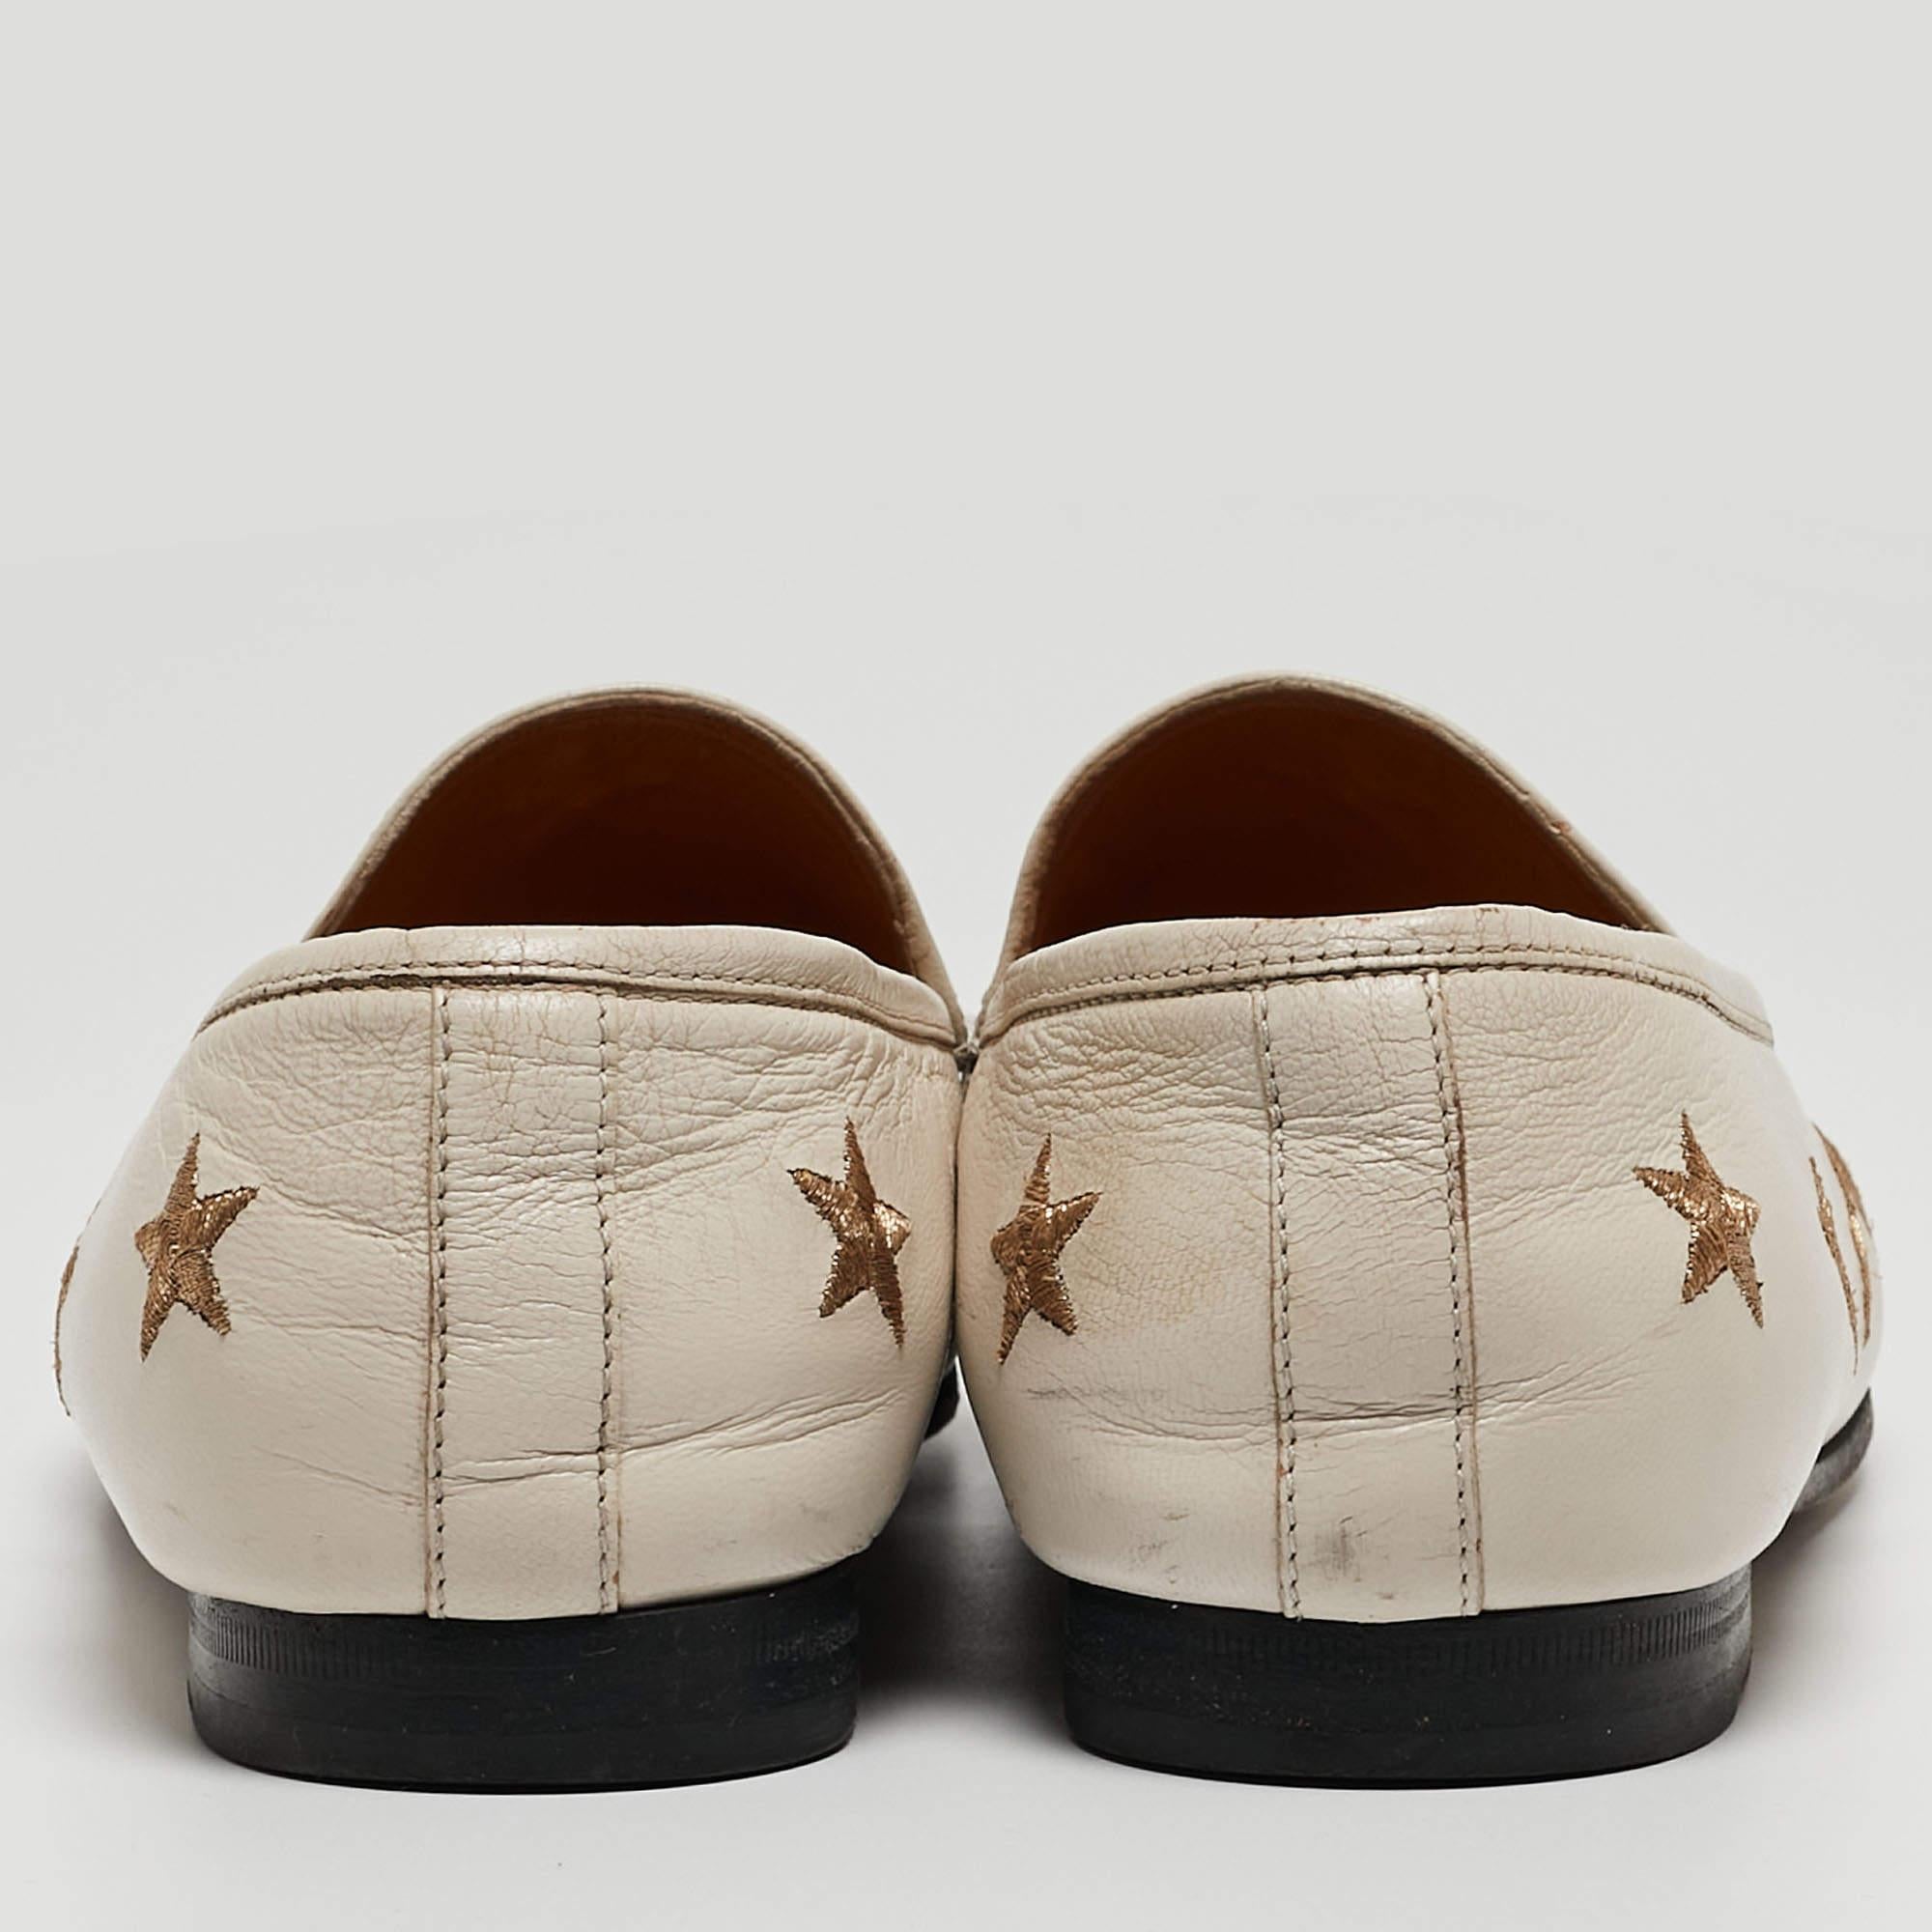 Gucci Cream Leather Bee & Star Embroidered Jordaan Loafers Size 40 3